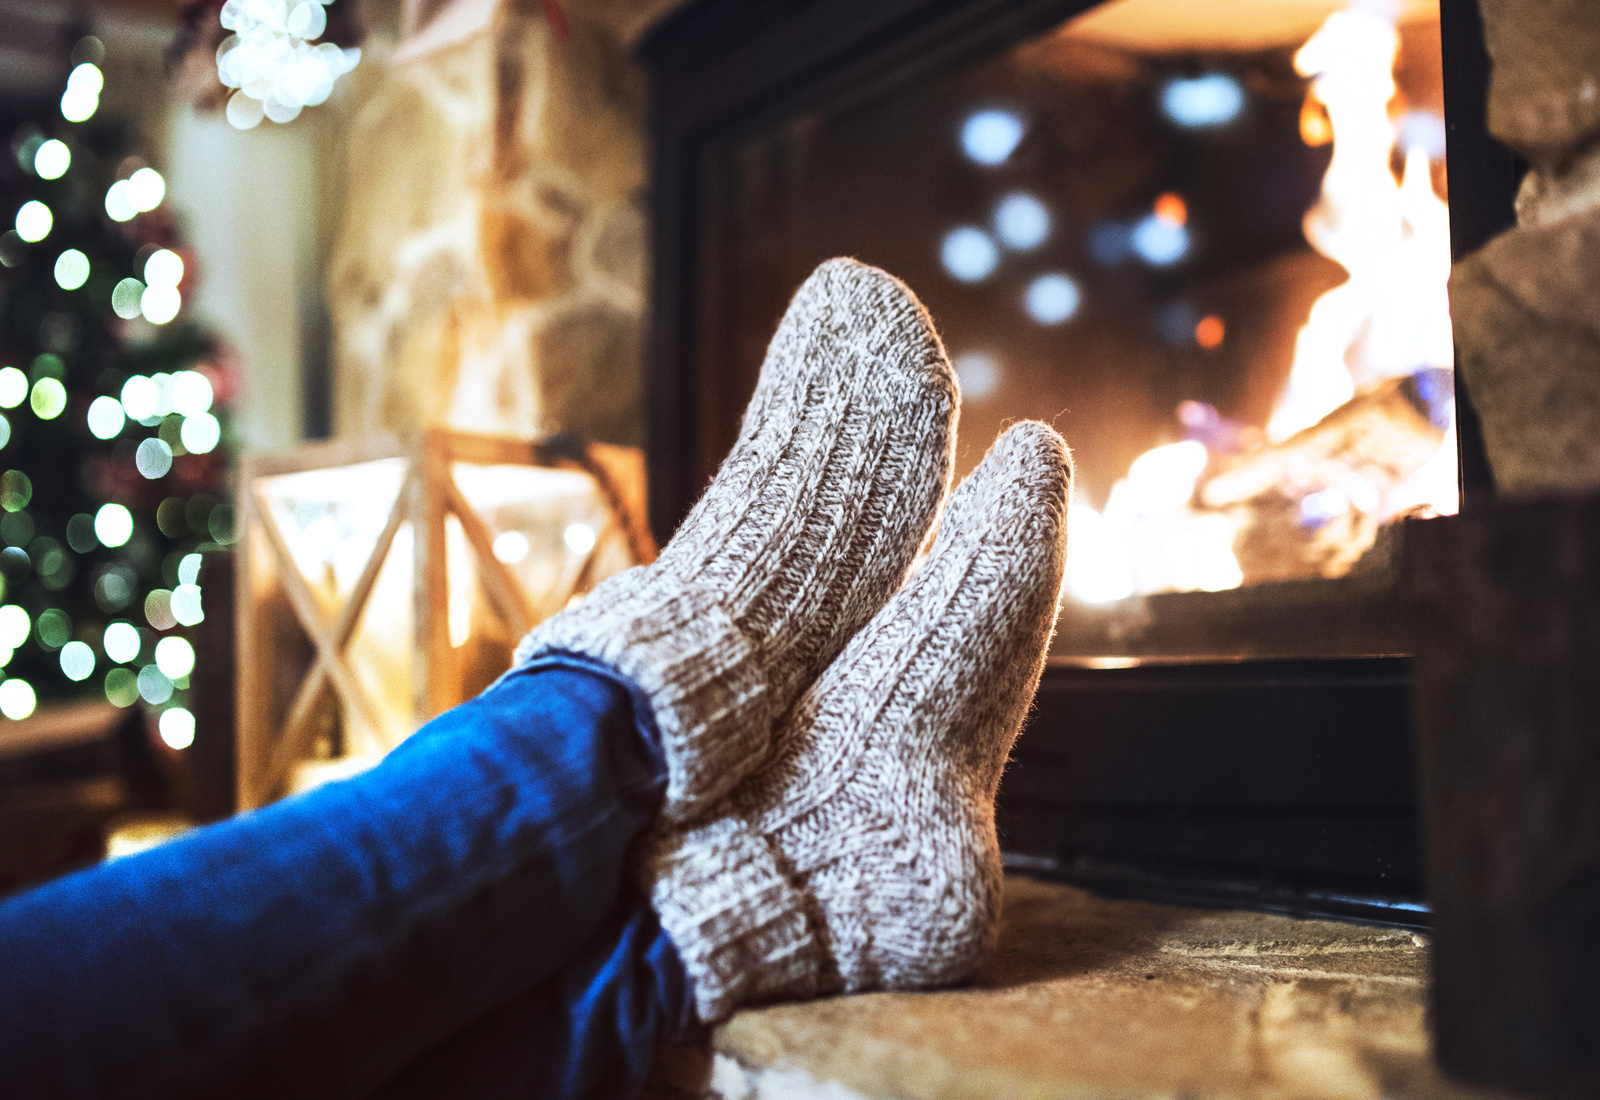 Hey, We Bet You Can’t Get Better Than 80% On This Random Knowledge Quiz Cosy warm socks fireplace